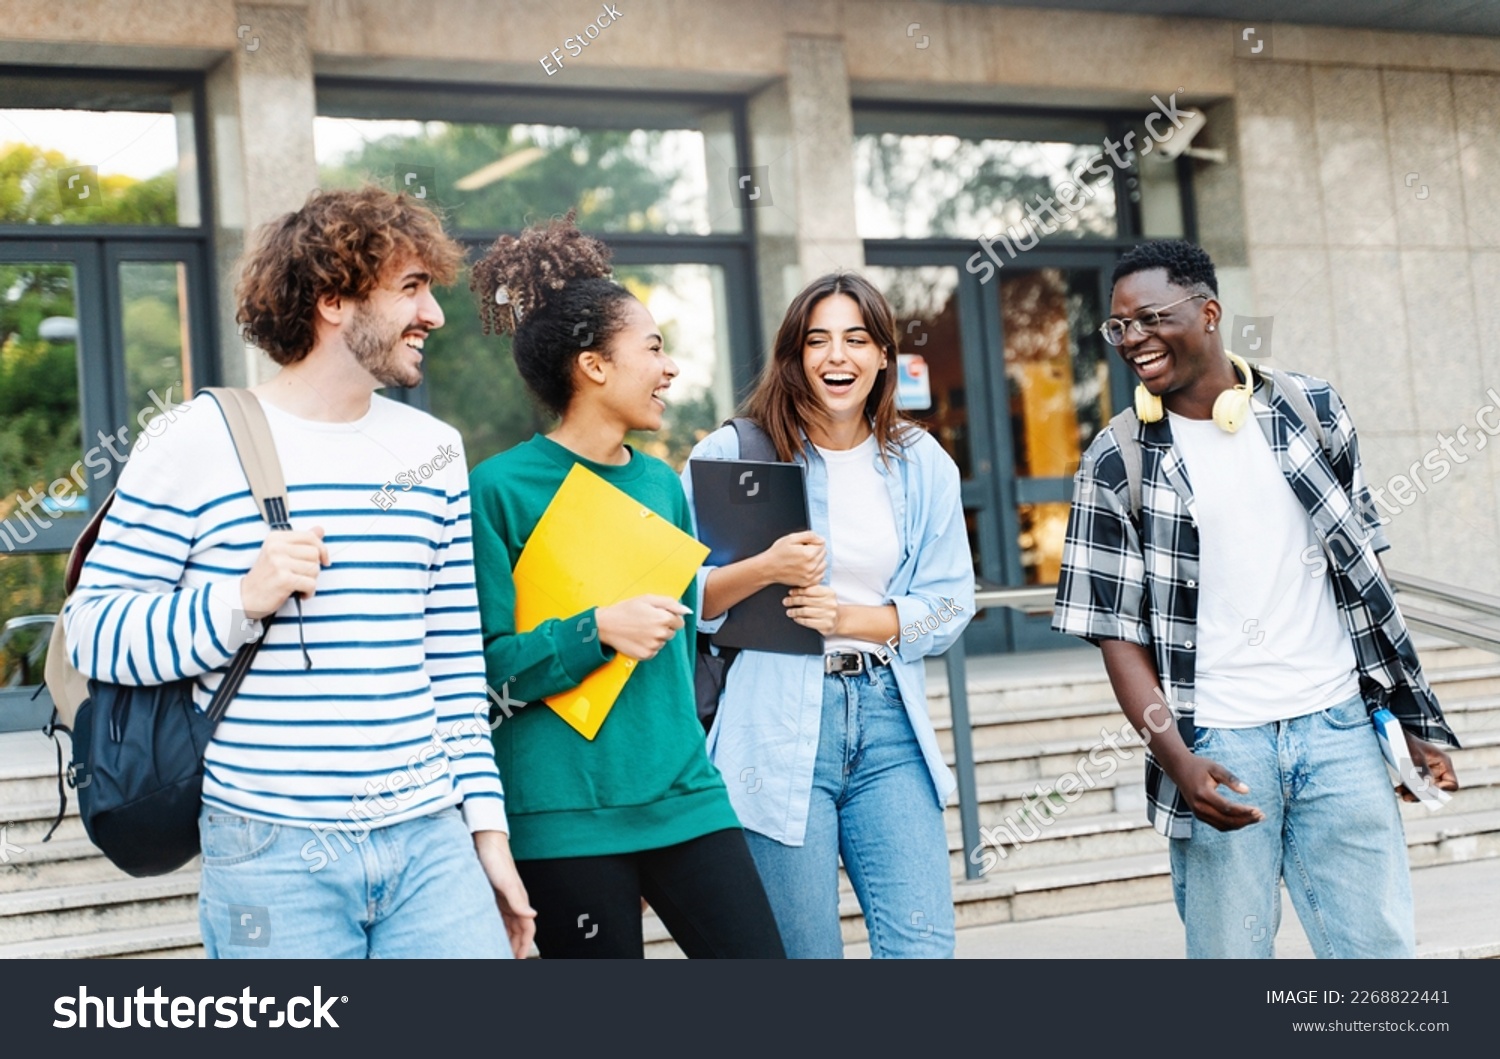 Happy international university friends walking together in campus, chatting and laughing outdoors after school #2268822441